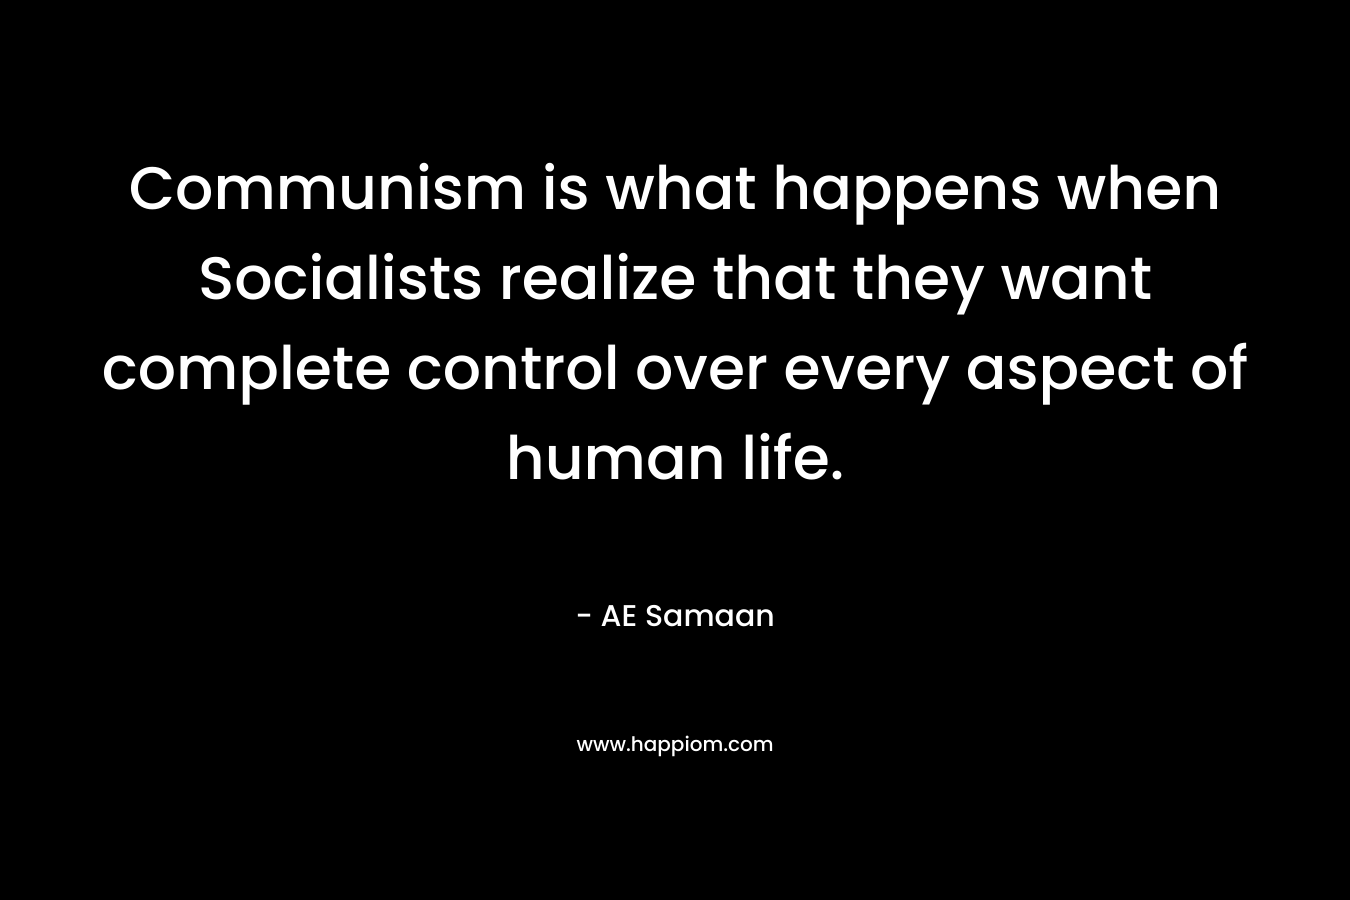 Communism is what happens when Socialists realize that they want complete control over every aspect of human life.